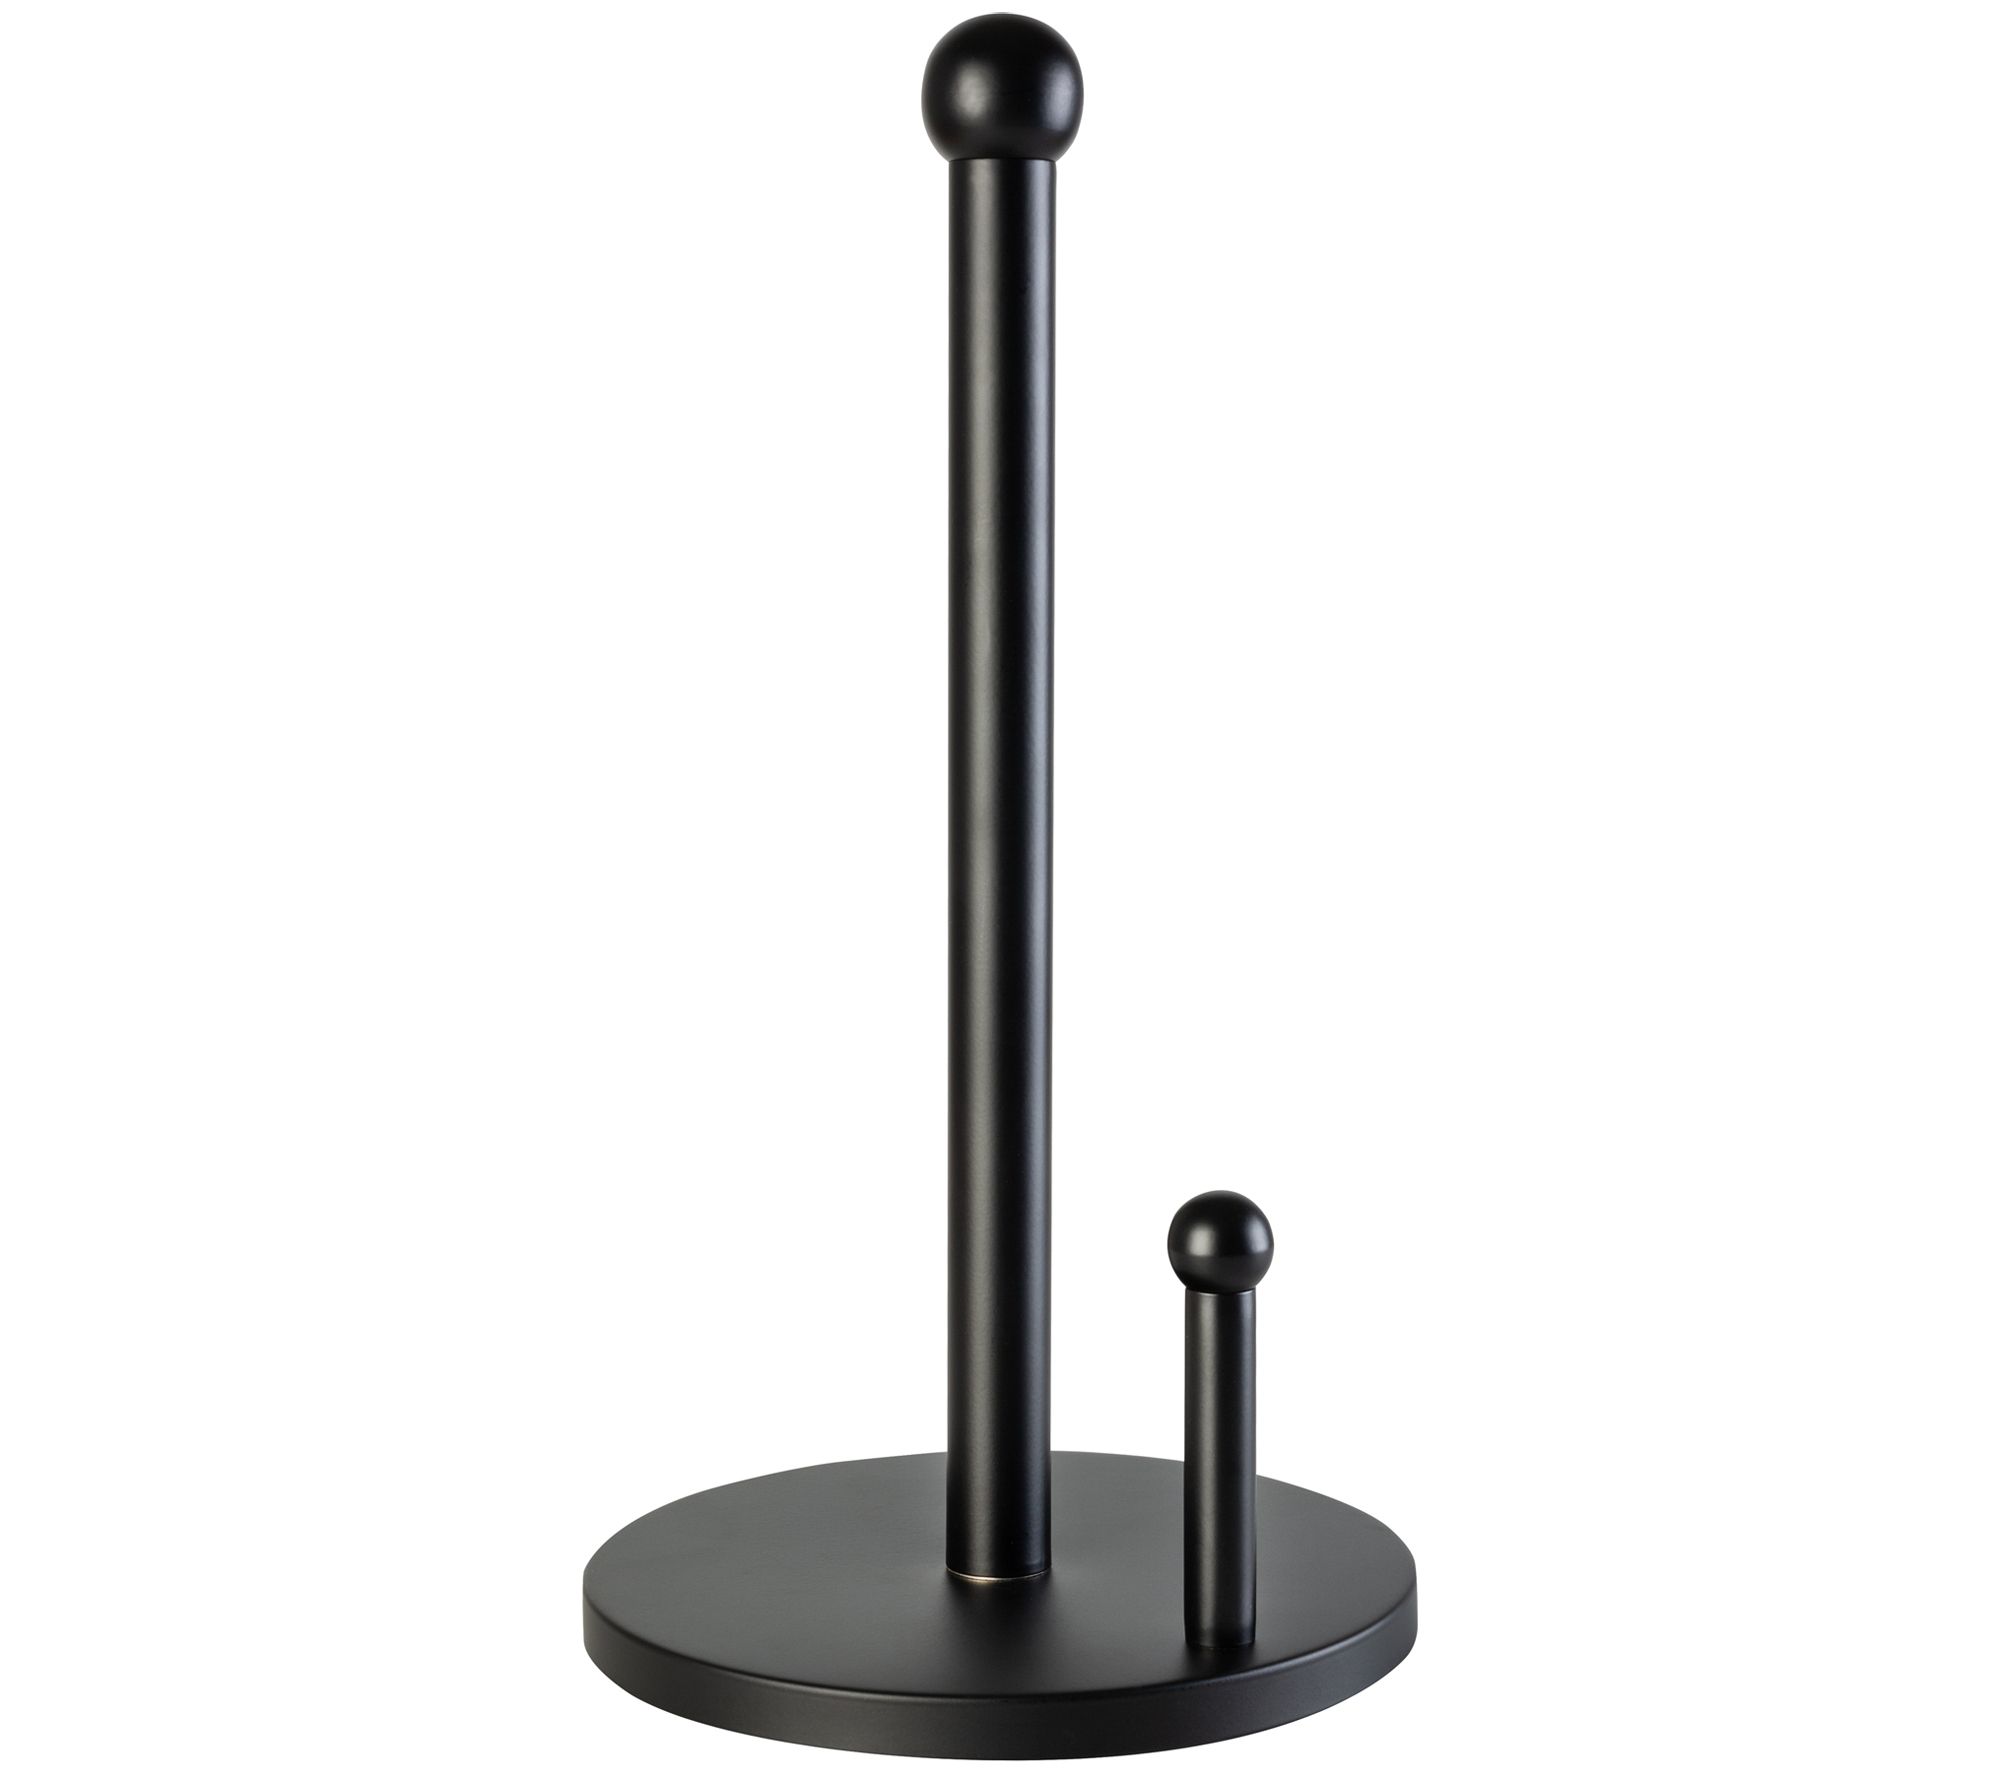 Home Basics Double Wire Free Standing Paper Towel Holder, Black